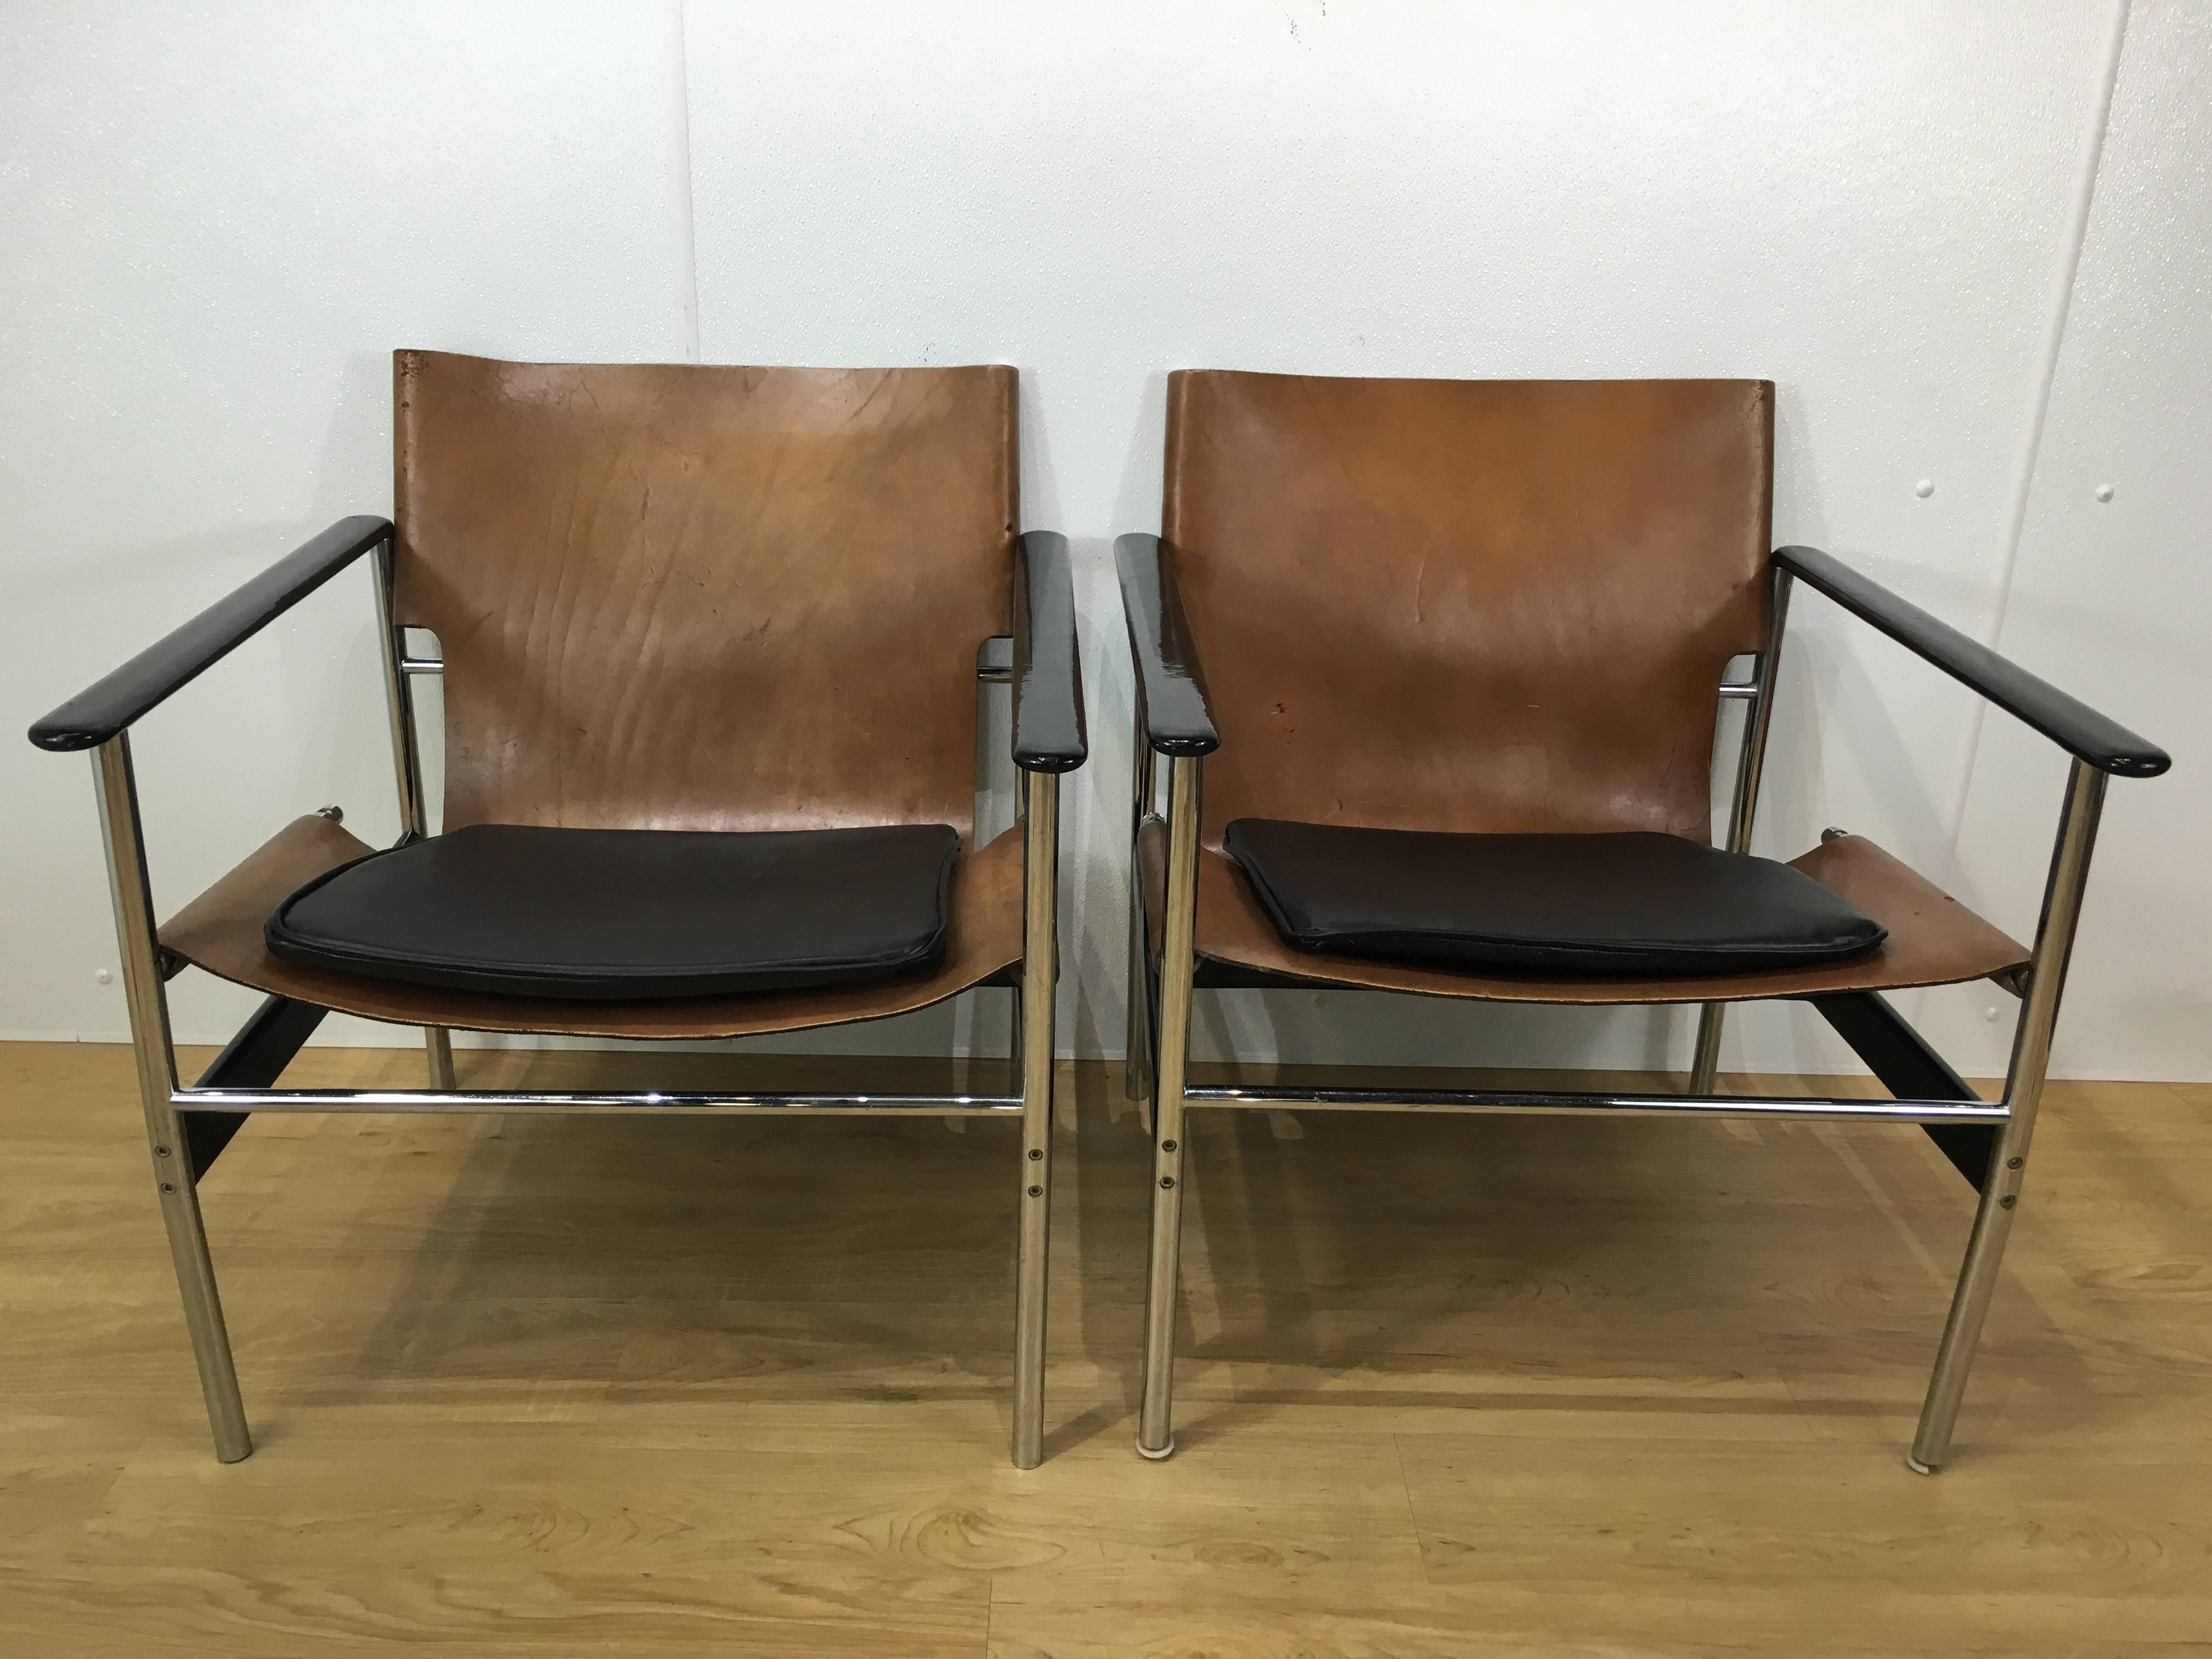 Pair of lounge chairs by Charles Pollock for Knoll.